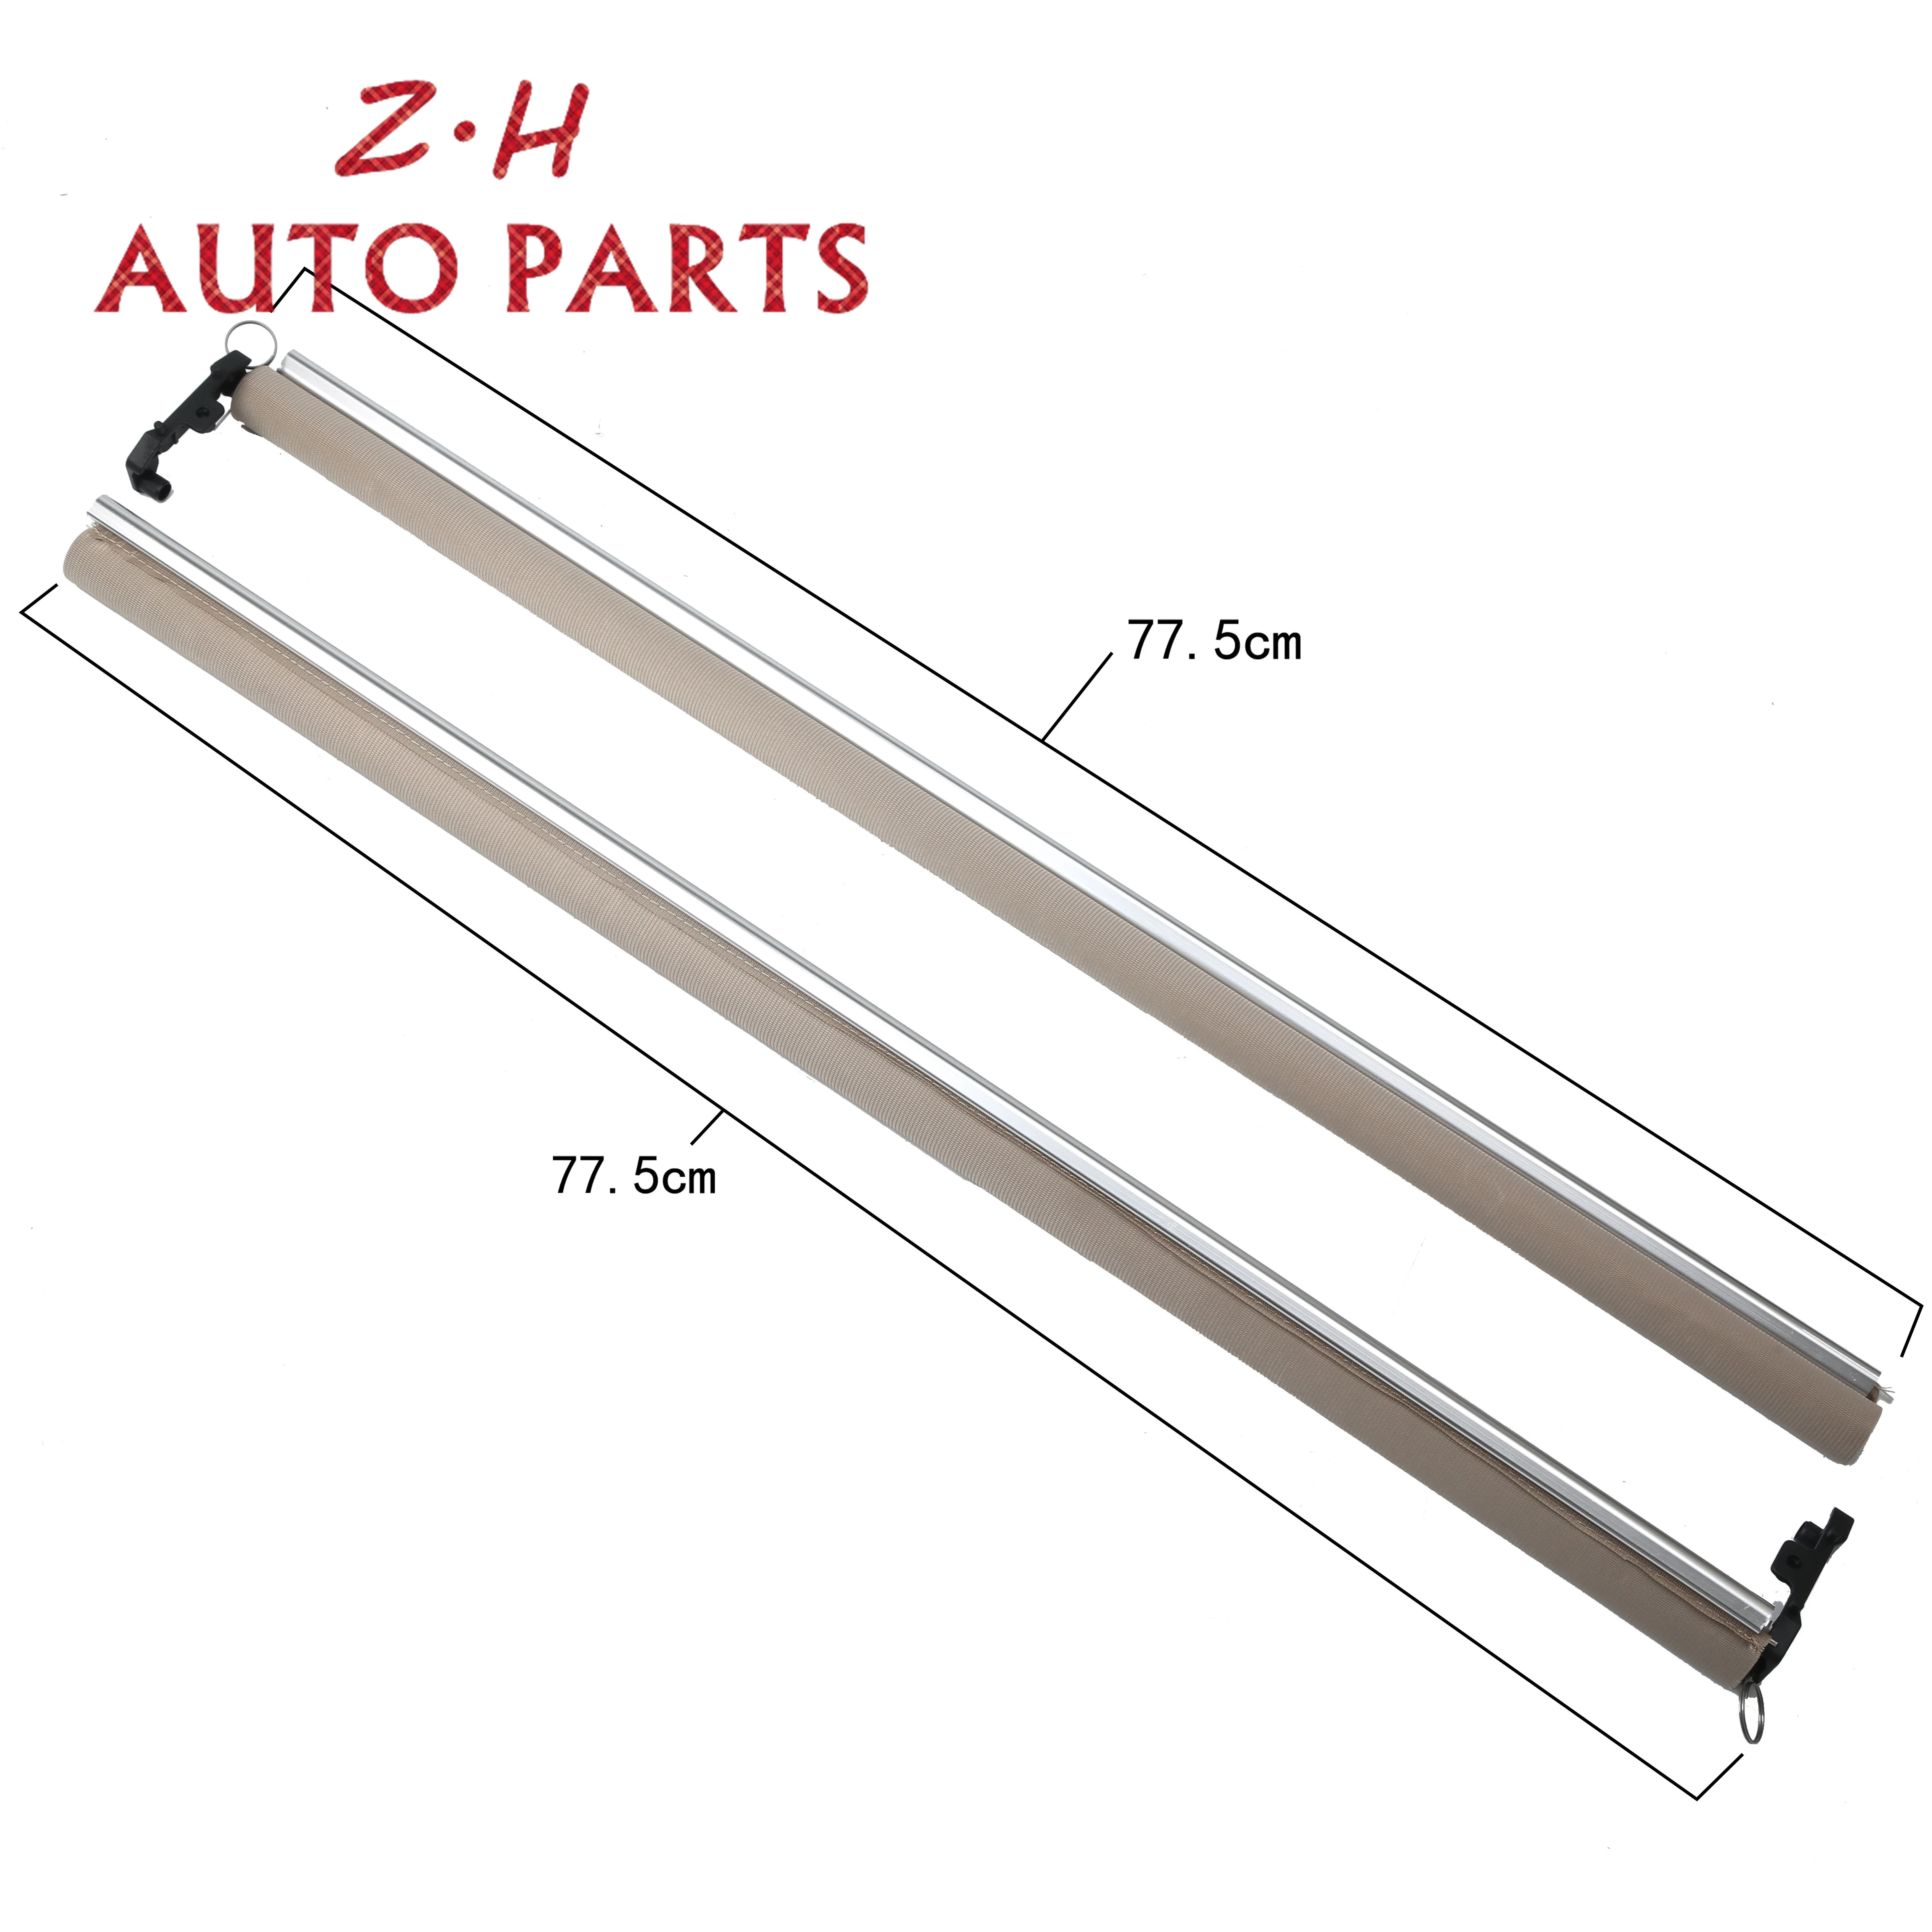 

Front A Pair Of Beige Sunroof Roller Shutter For Mercedes-Benz E 200 260 CGI 300 7A/MT A 212 780 13 40 7L91 A 212 780 13 40 9G72